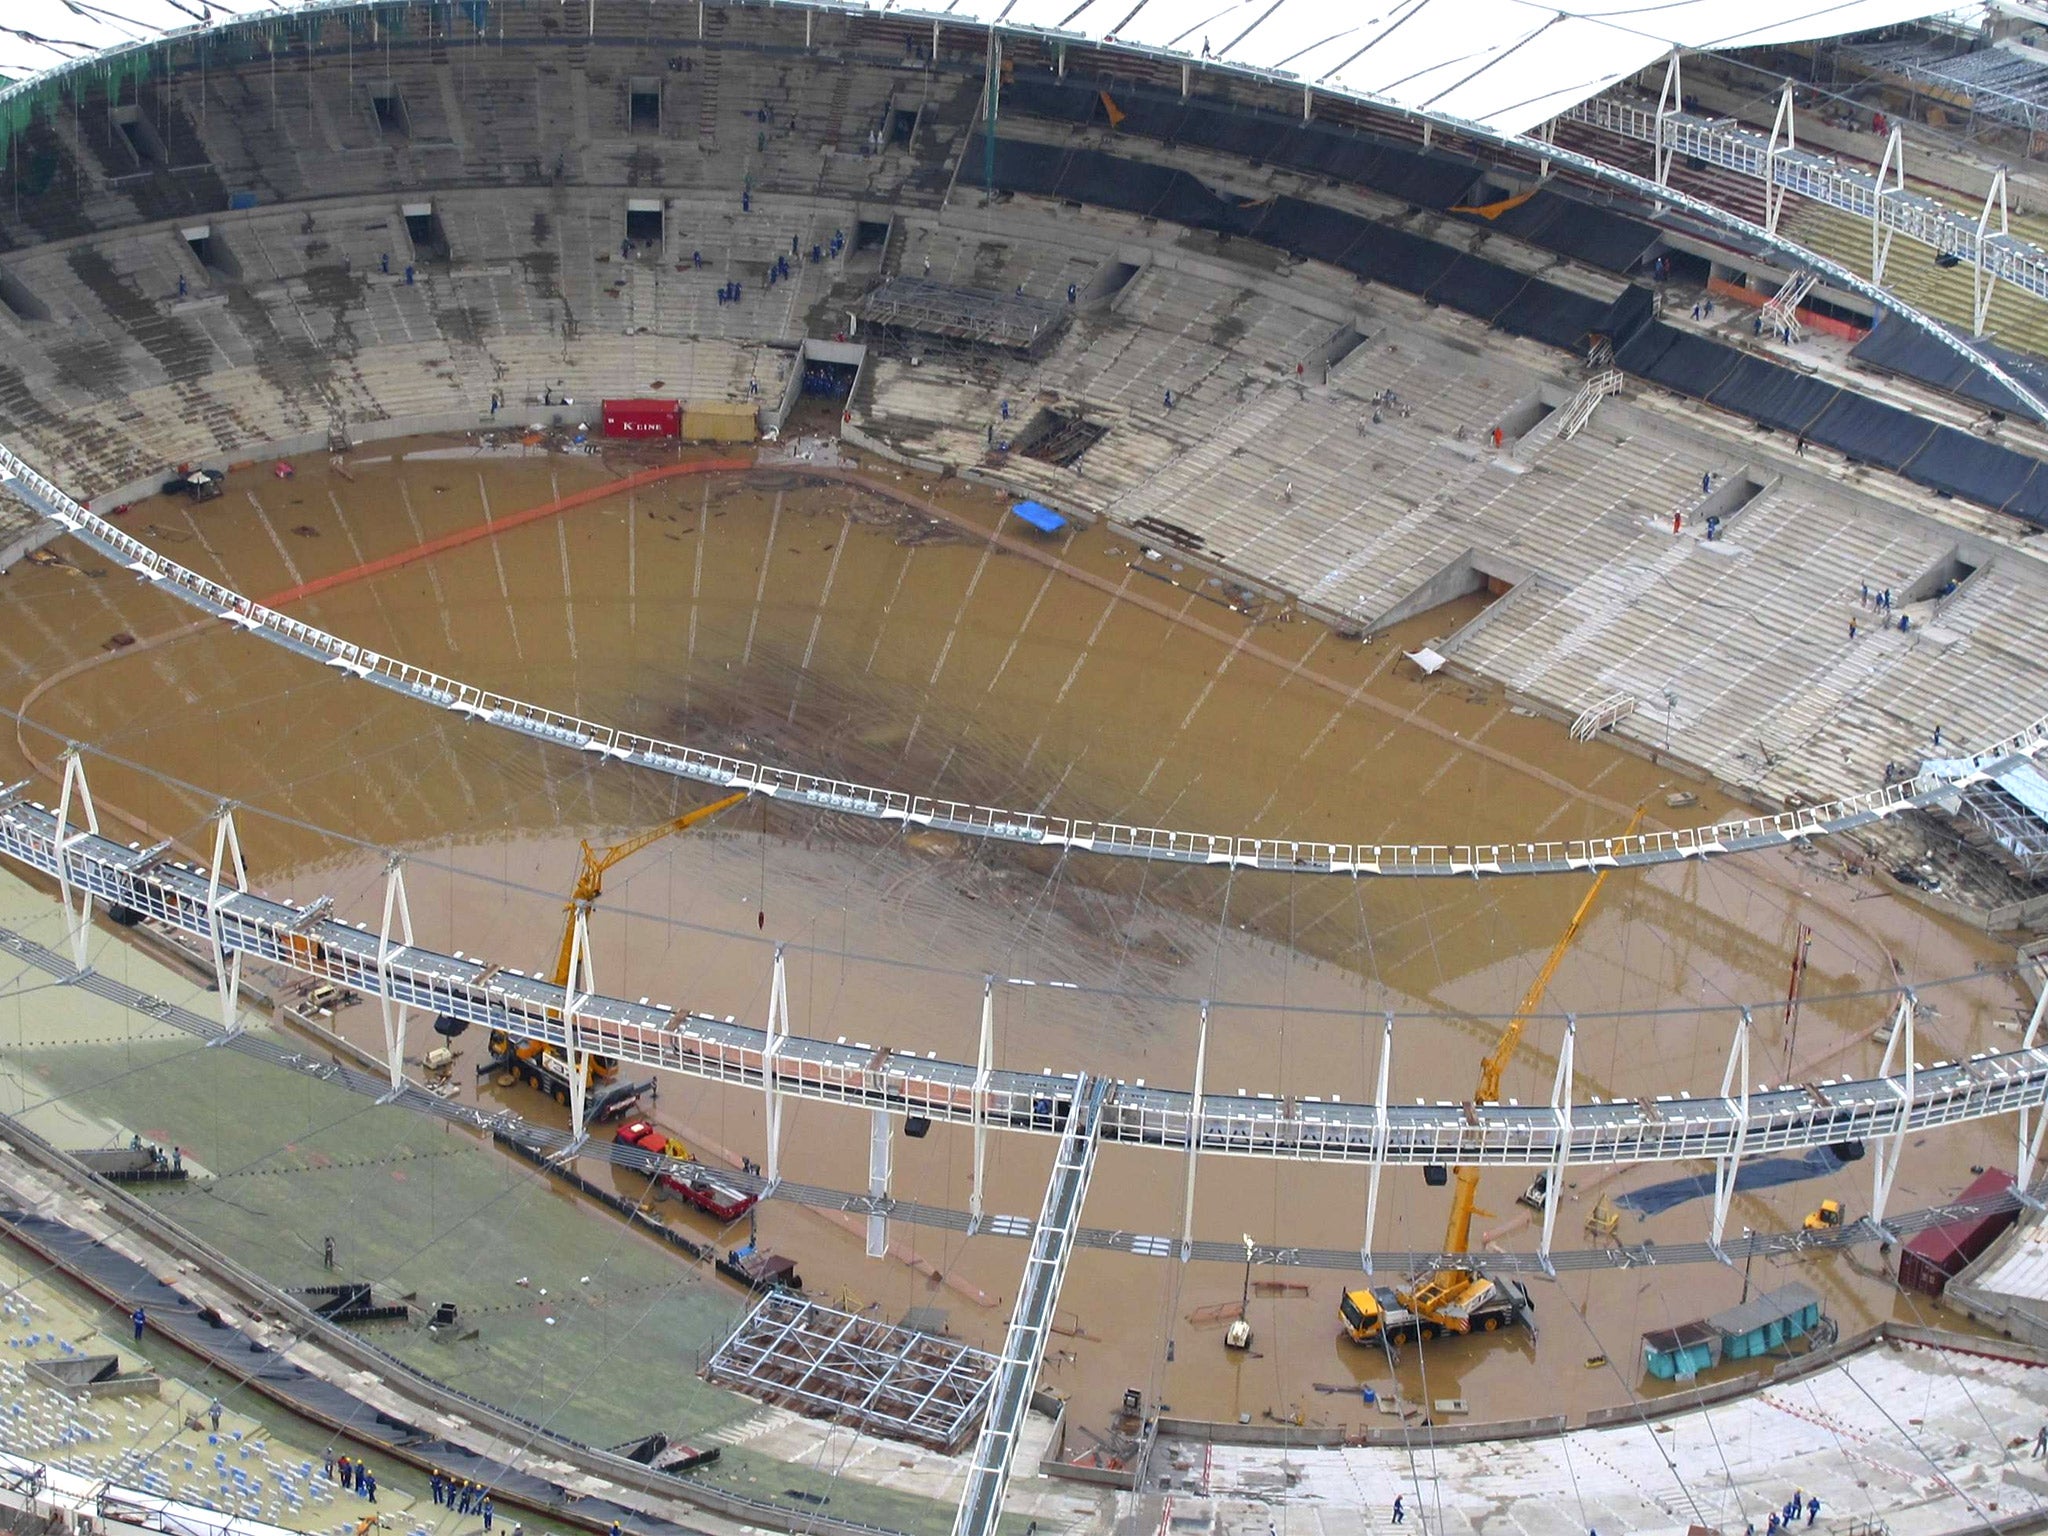 England are due to play in the rebuilt Maracana in Rio on 2 June